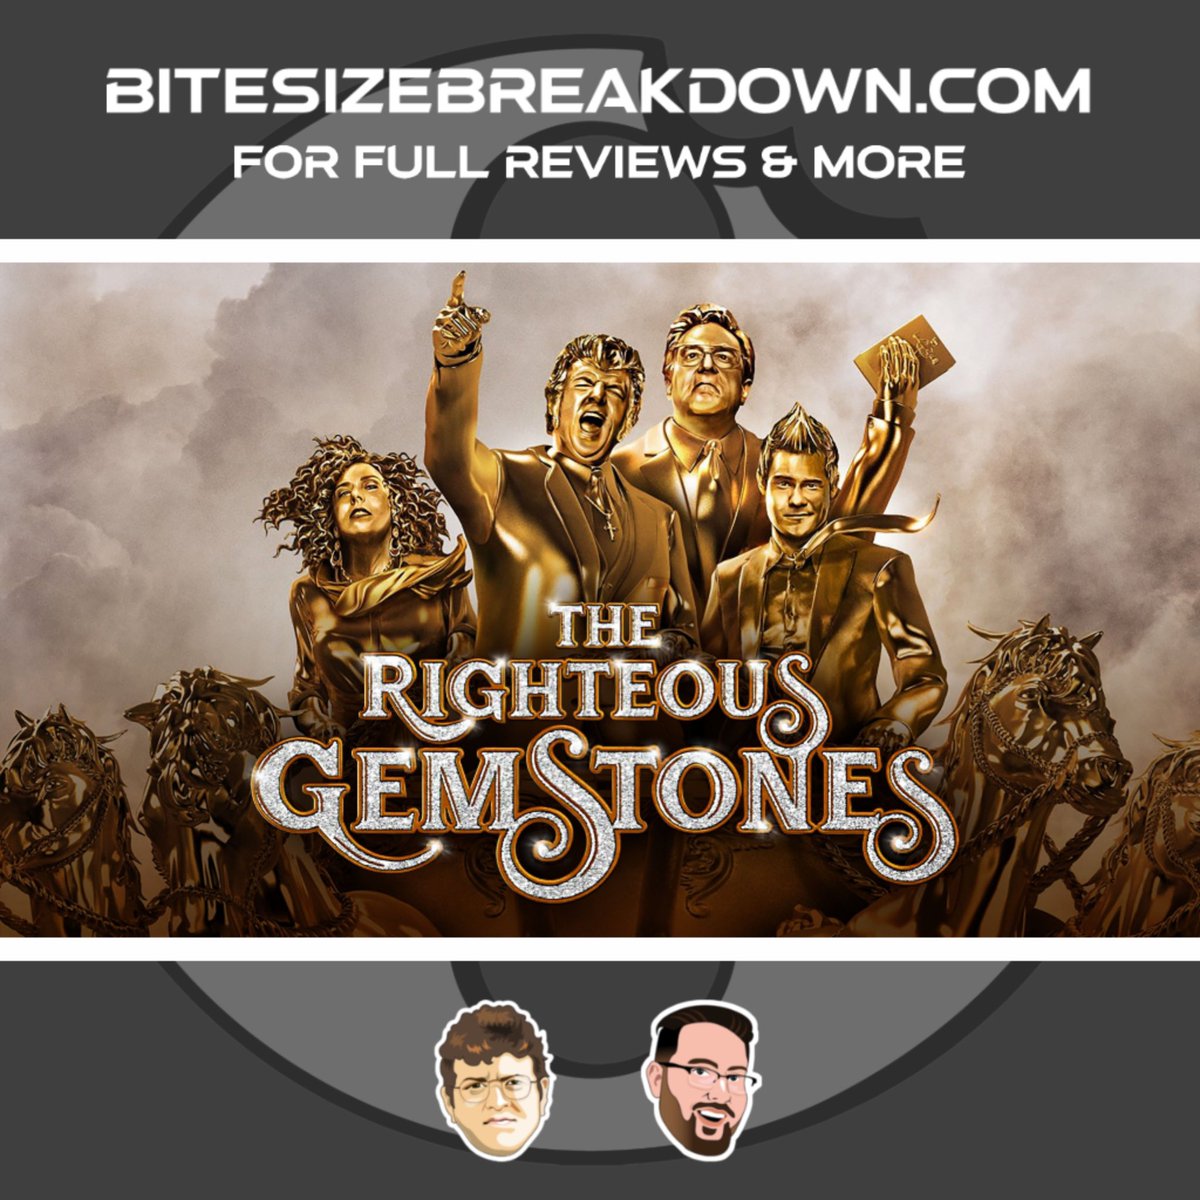 Check out what our crew thought of Season 3 of #TheRighteousGemstones starring Danny McBride, John Goodman, & Adam Devine

bitesizebreakdown.com/series-review/…